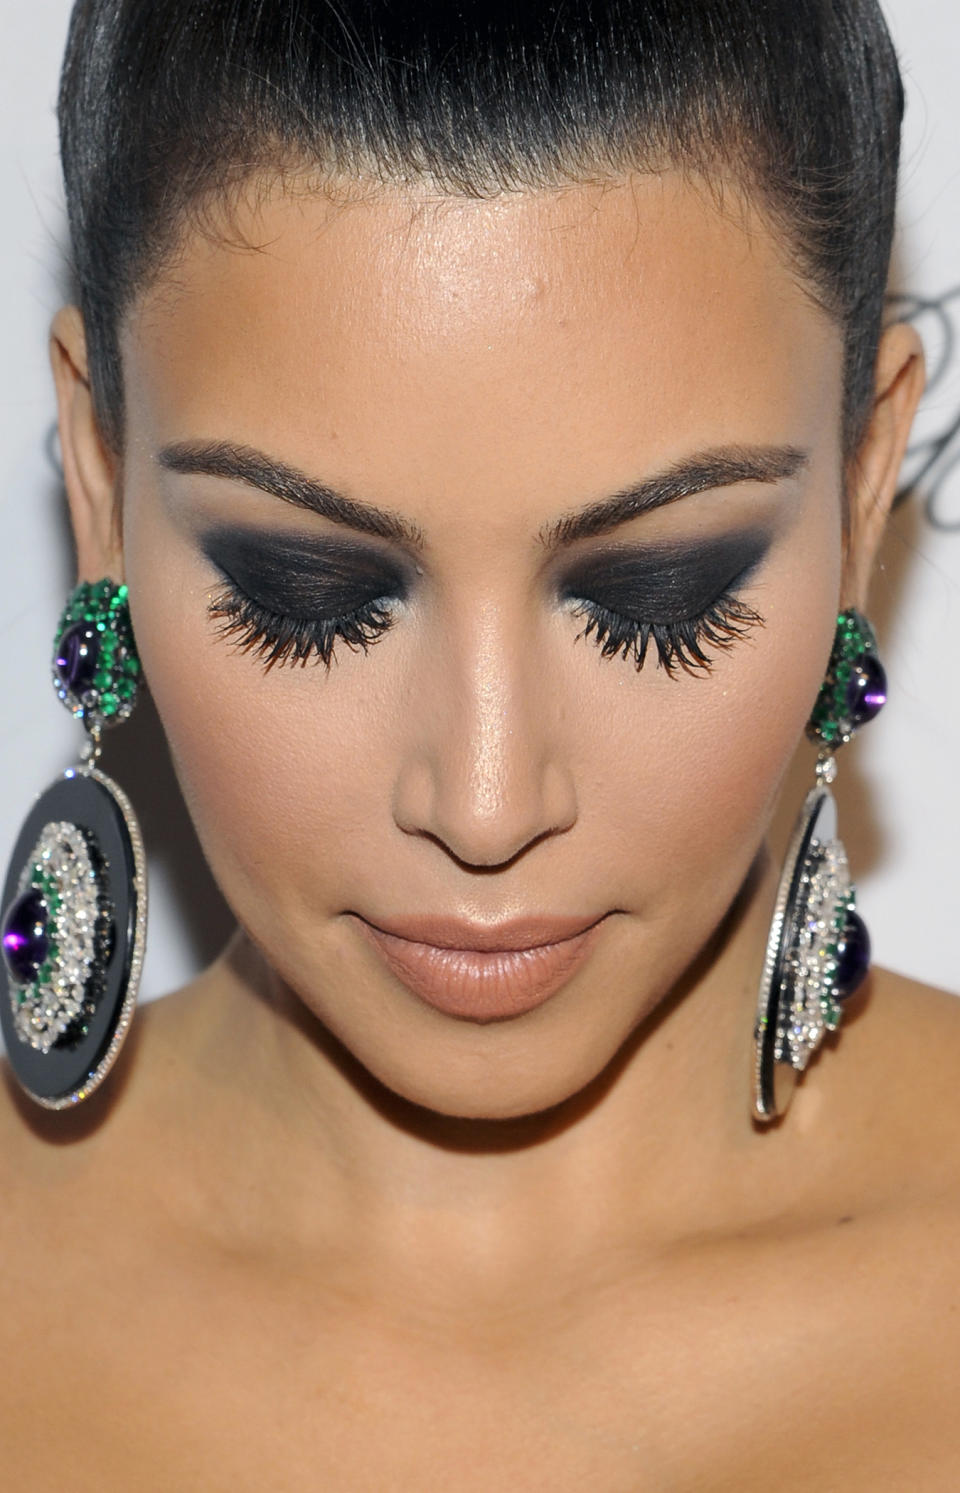 FILE - Television personality Kim Kardashian wears false eyelashes as she attends the Gabrielle's Angel Foundation for Cancer Research "Angel Ball" honors gala in New York on Oct. 17, 2011. (AP Photo/Evan Agostini, File)